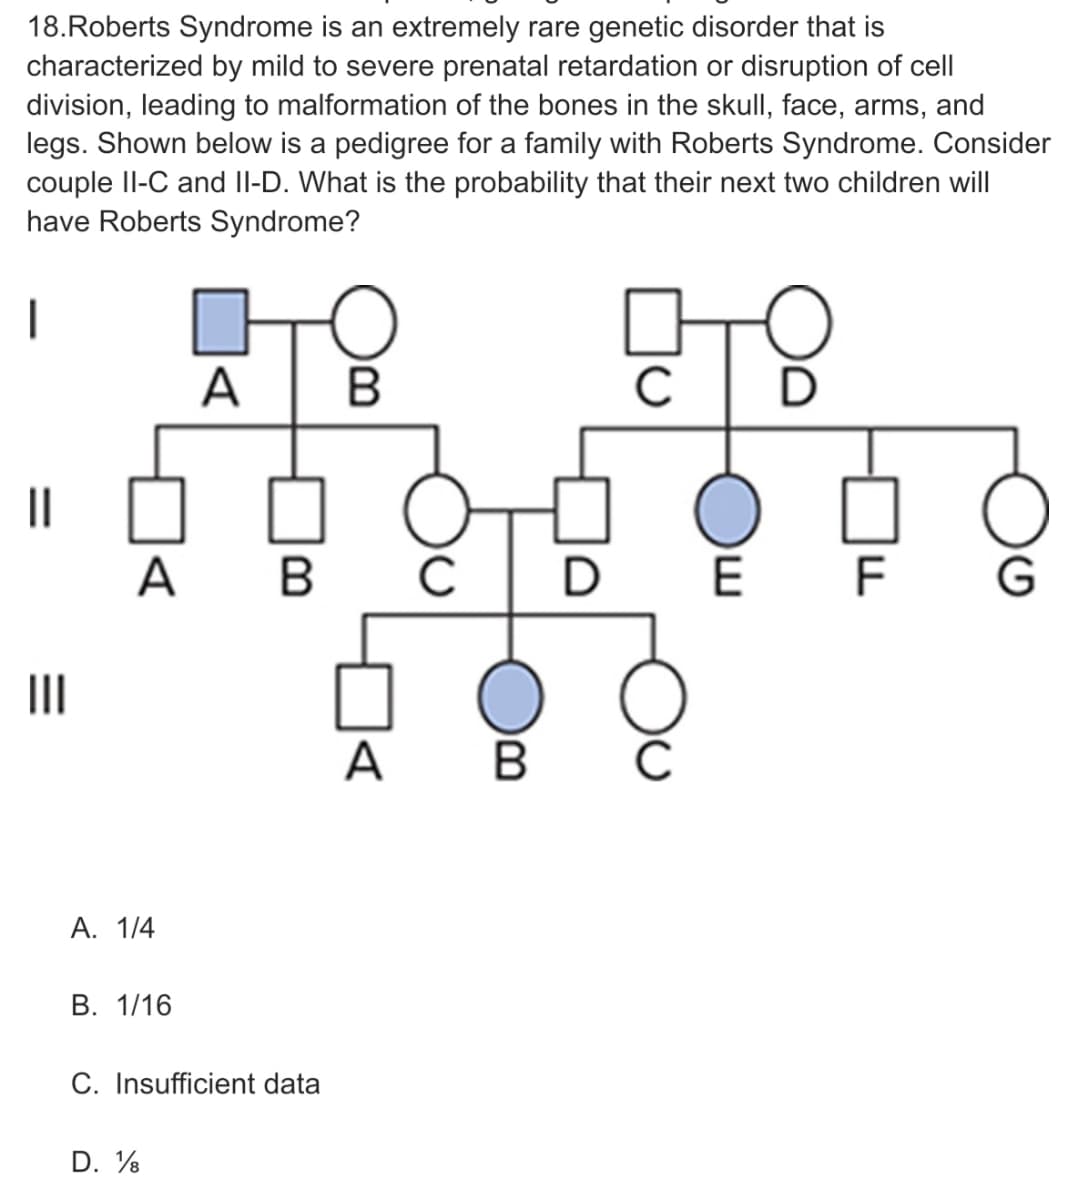 18.Roberts Syndrome is an extremely rare genetic disorder that is
characterized by mild to severe prenatal retardation or disruption of cell
division, leading to malformation of the bones in the skull, face, arms, and
legs. Shown below is a pedigree for a family with Roberts Syndrome. Consider
couple Il-C and Il-D. What is the probability that their next two children will
have Roberts Syndrome?
A
B
C
D
||
A
C
D
F
II
A
В
А. 1/4
В. 1/16
C. Insufficient data
D. V%
